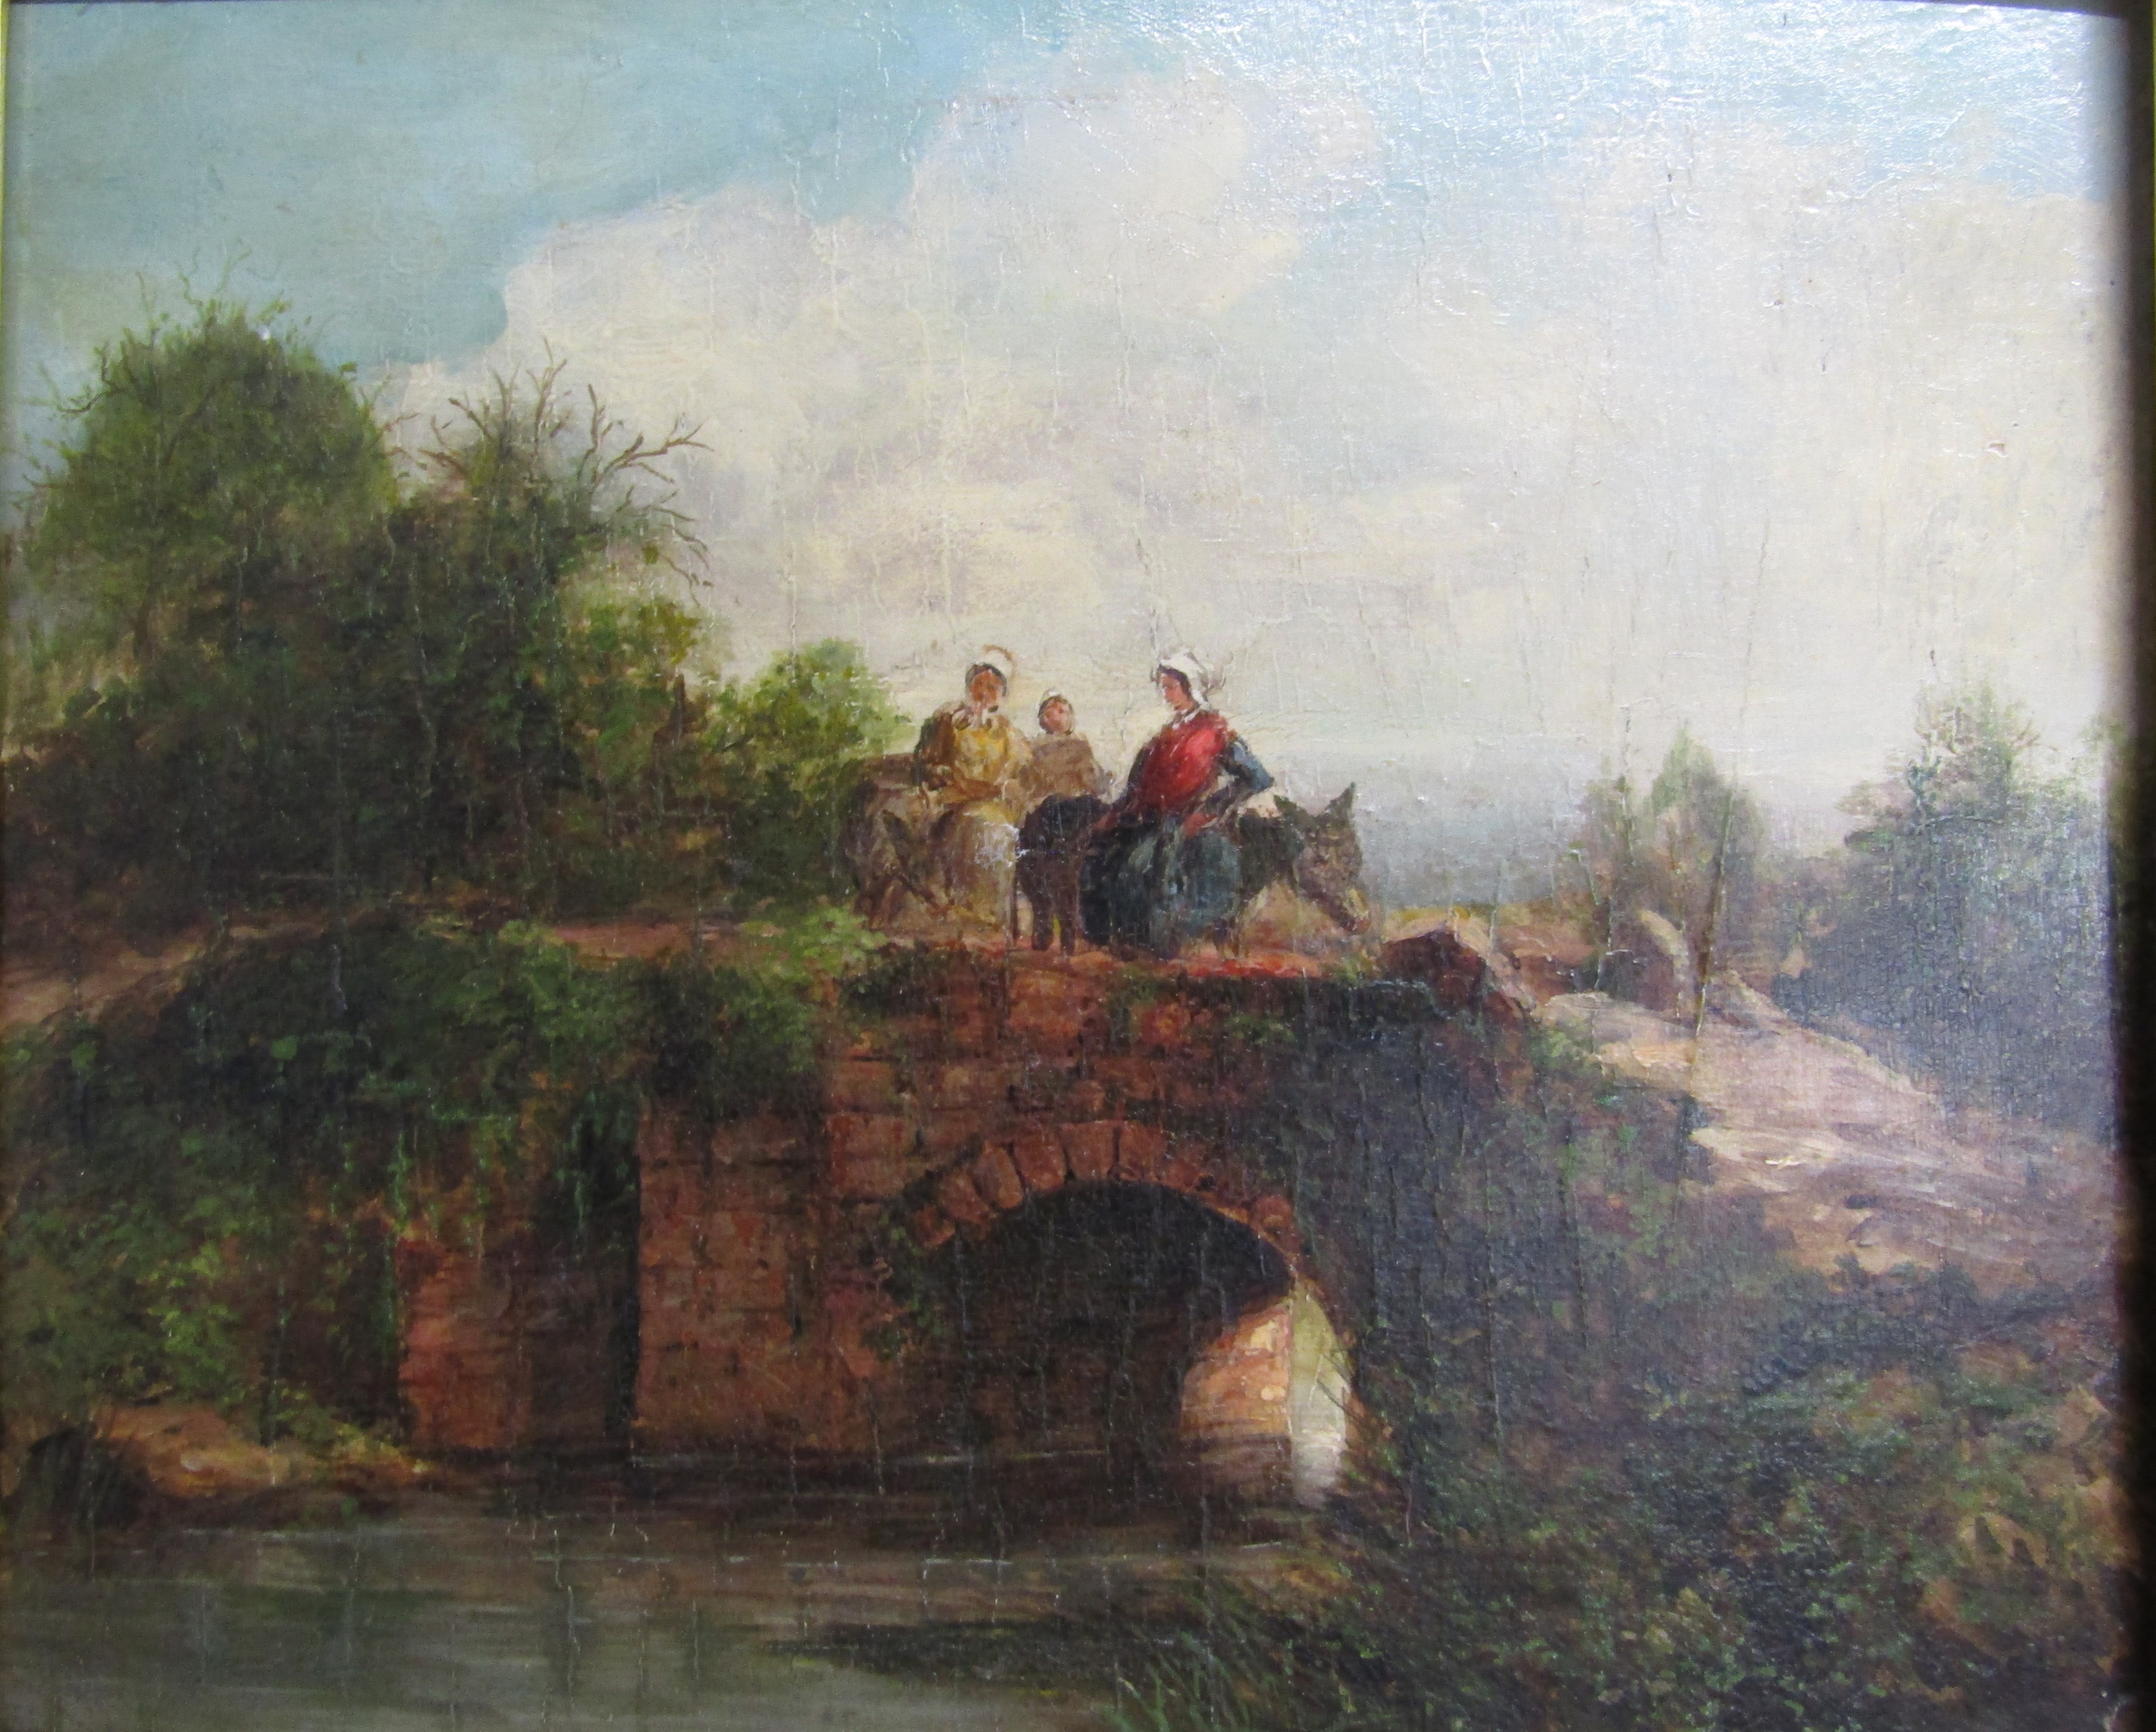 Framed oil on board - unsigned - ladies on donkeys crossing a country bridge - approx. 45cm x 41cm